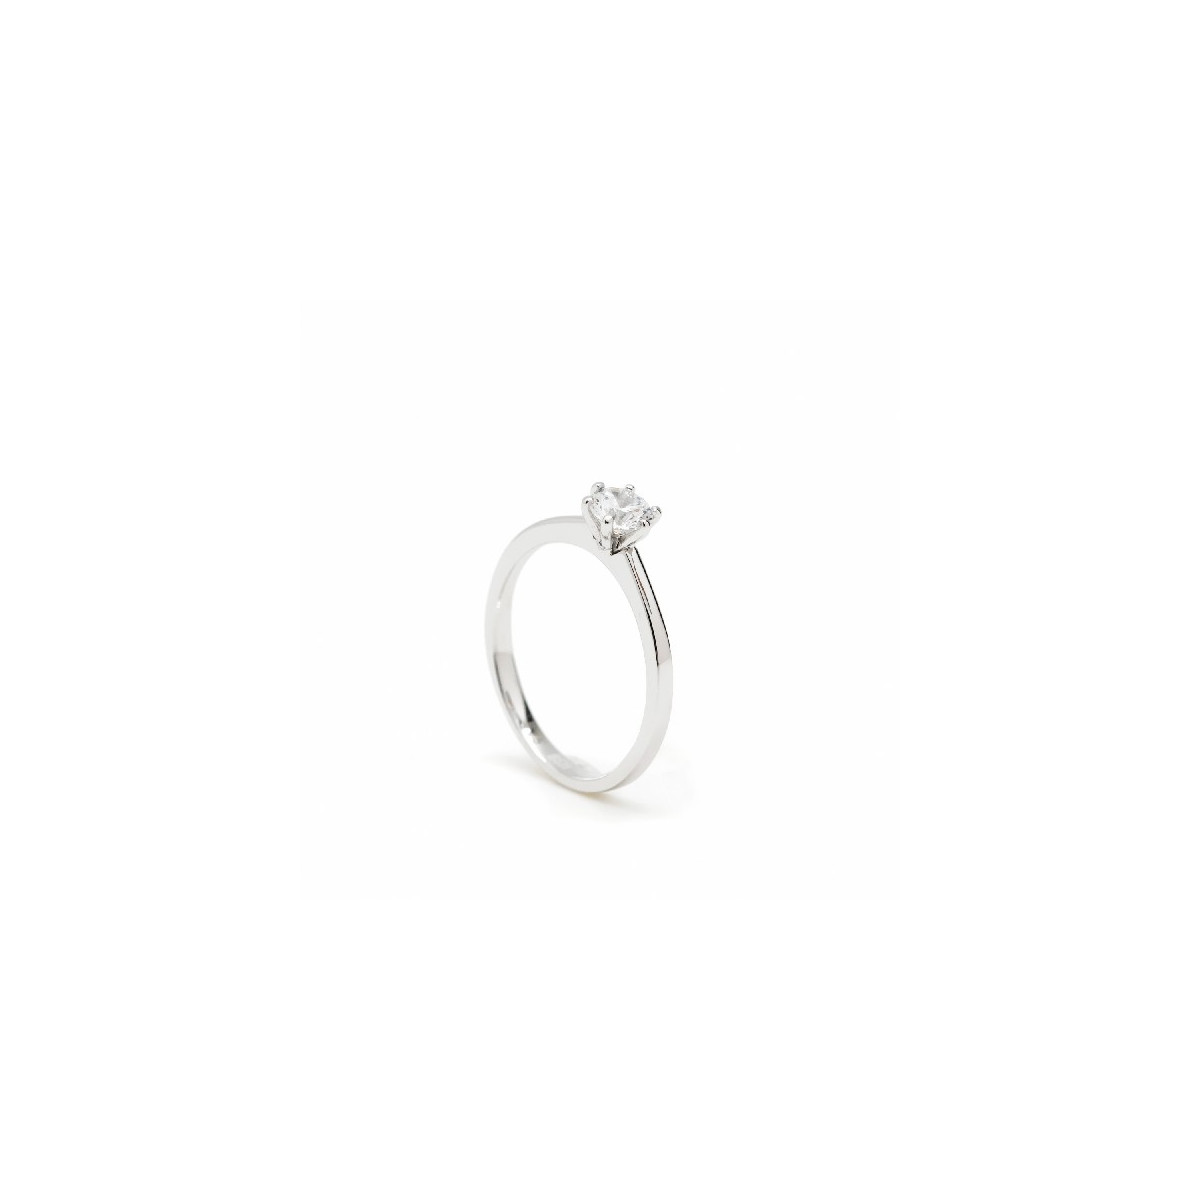 ANILLO LINEARGENT - 16595-R